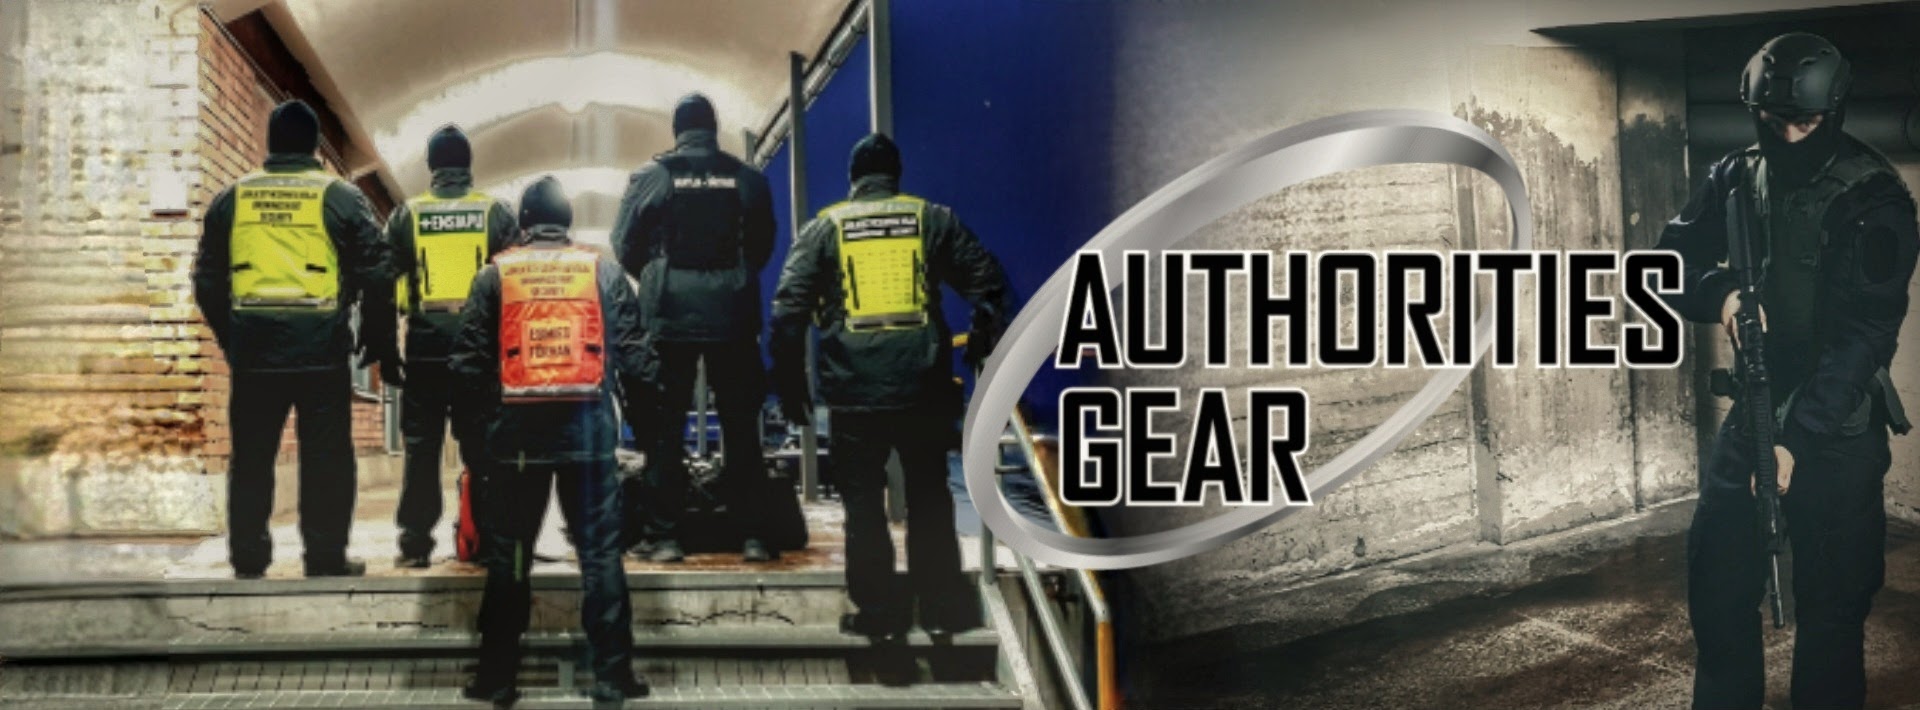 Authorities Gear- For The Professionals